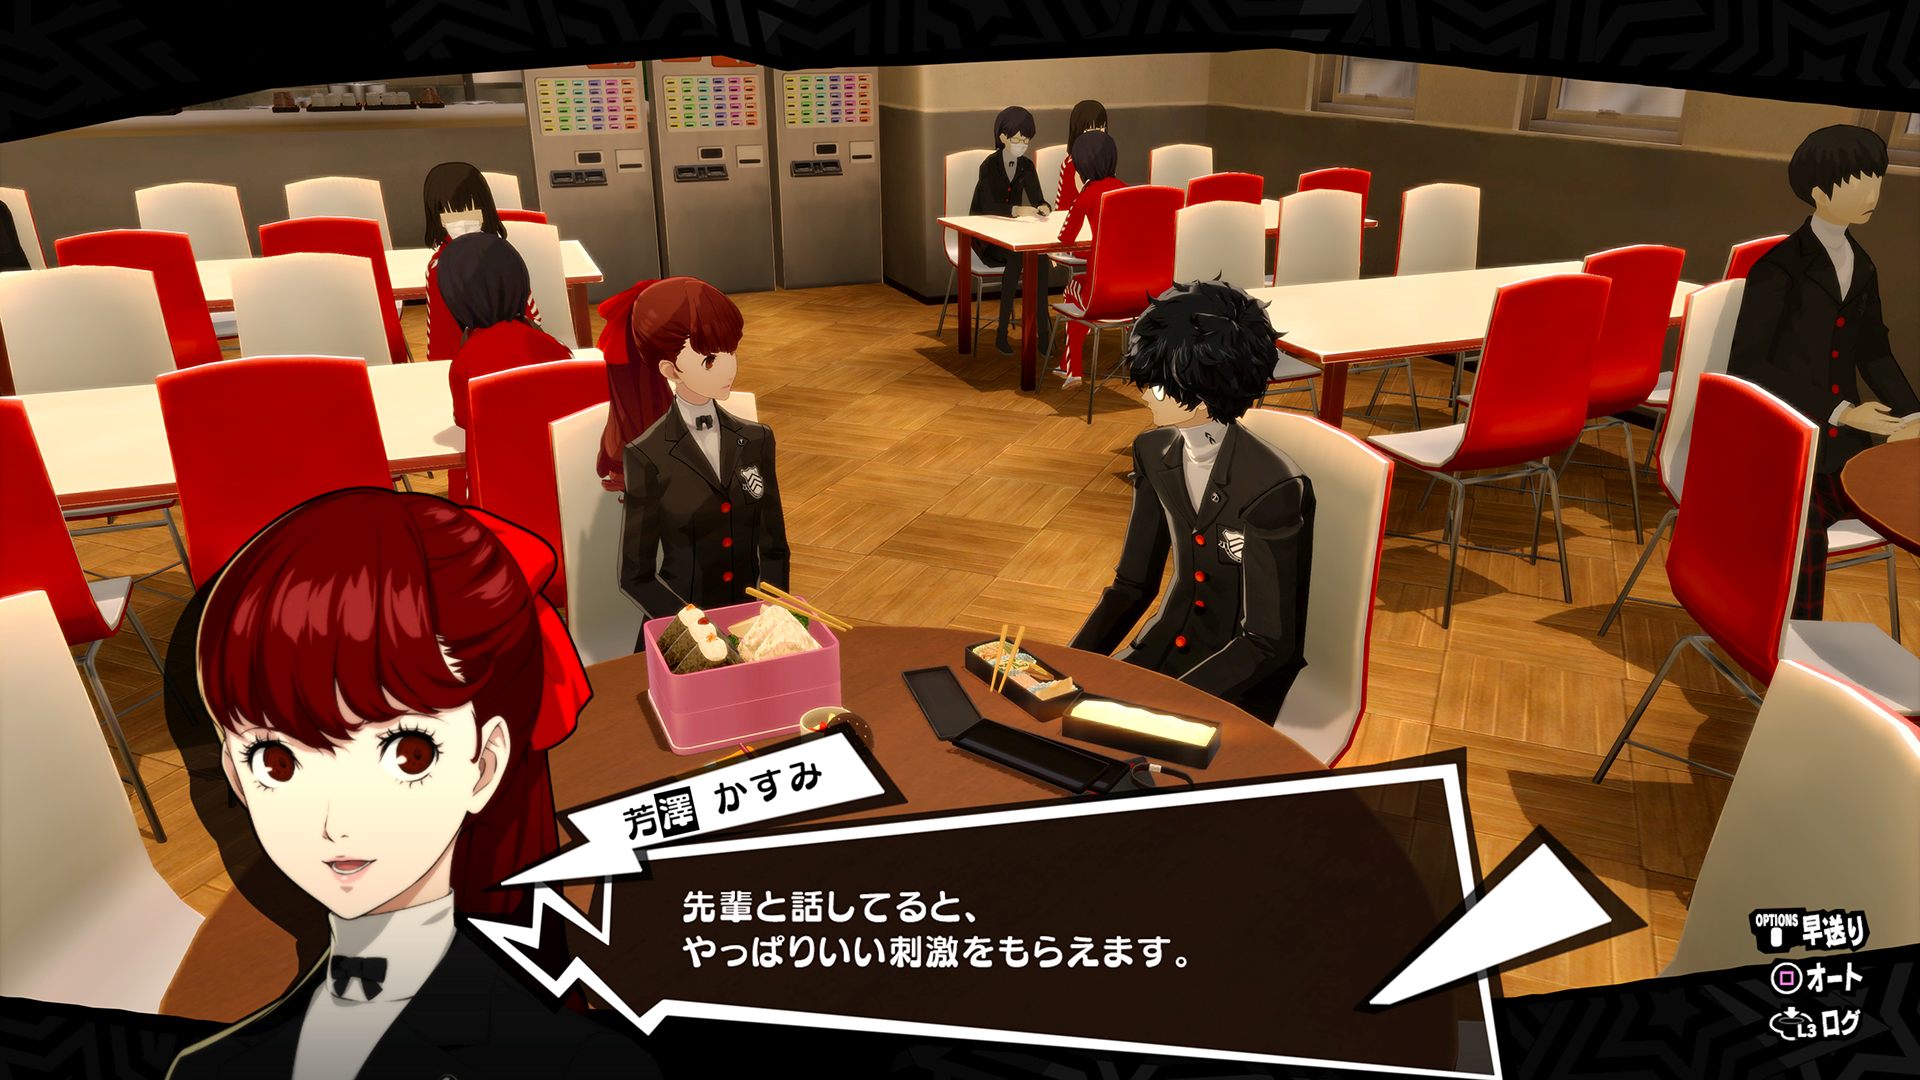 Persona 5 The Royal Revealed: Who's That New Female Character?